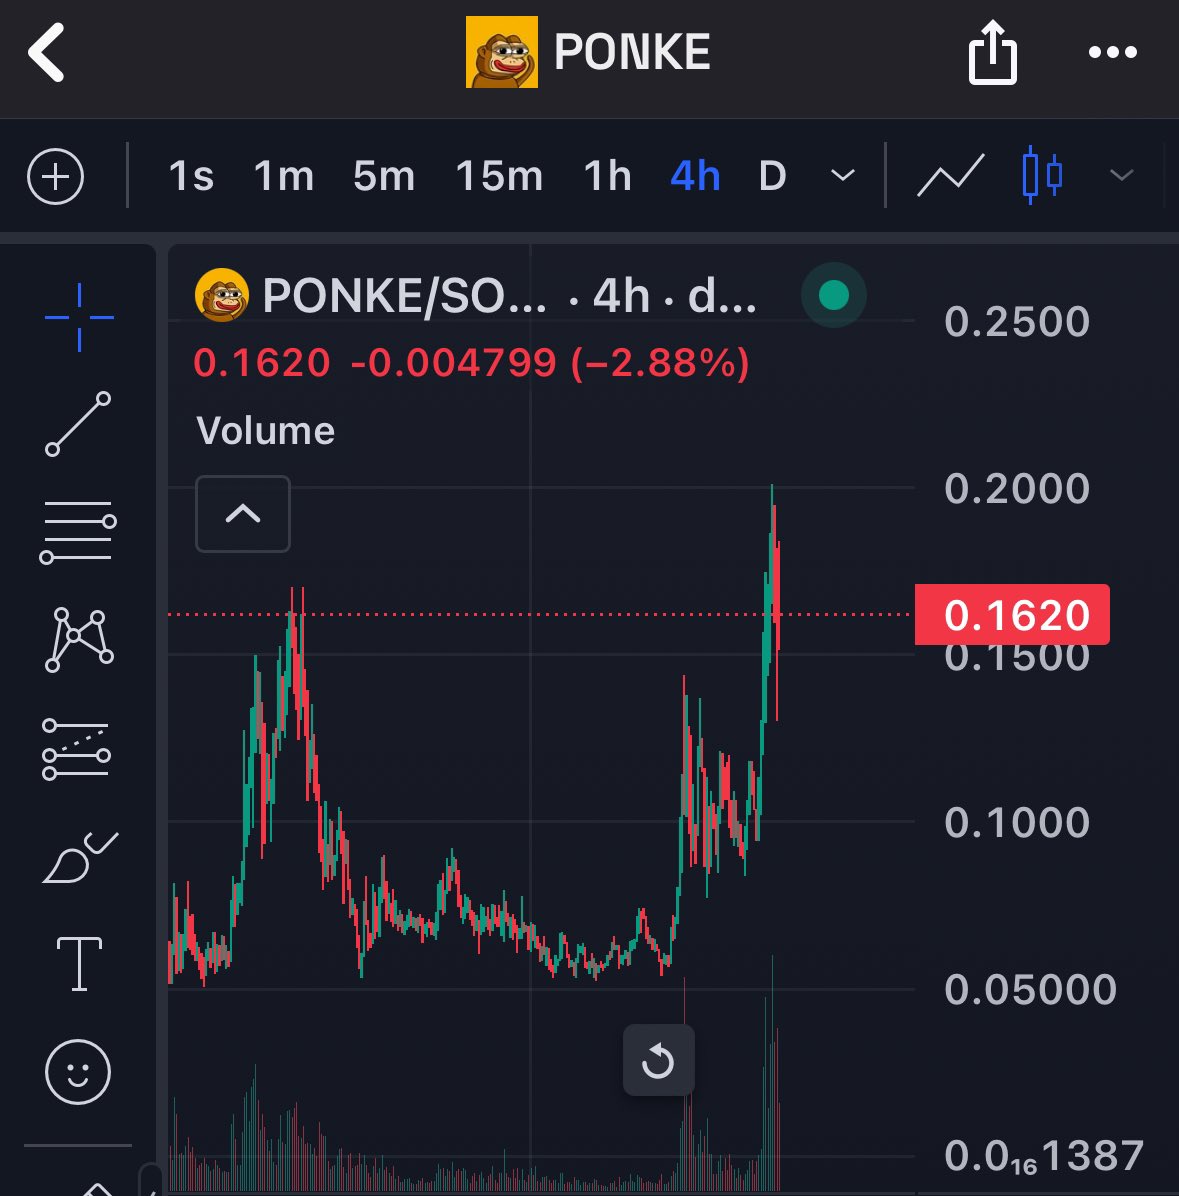 same shit as $nub $ponke had a consolidation for days till its breakout, when done, you can’t stop it $nub to follow, to reach $200m soon